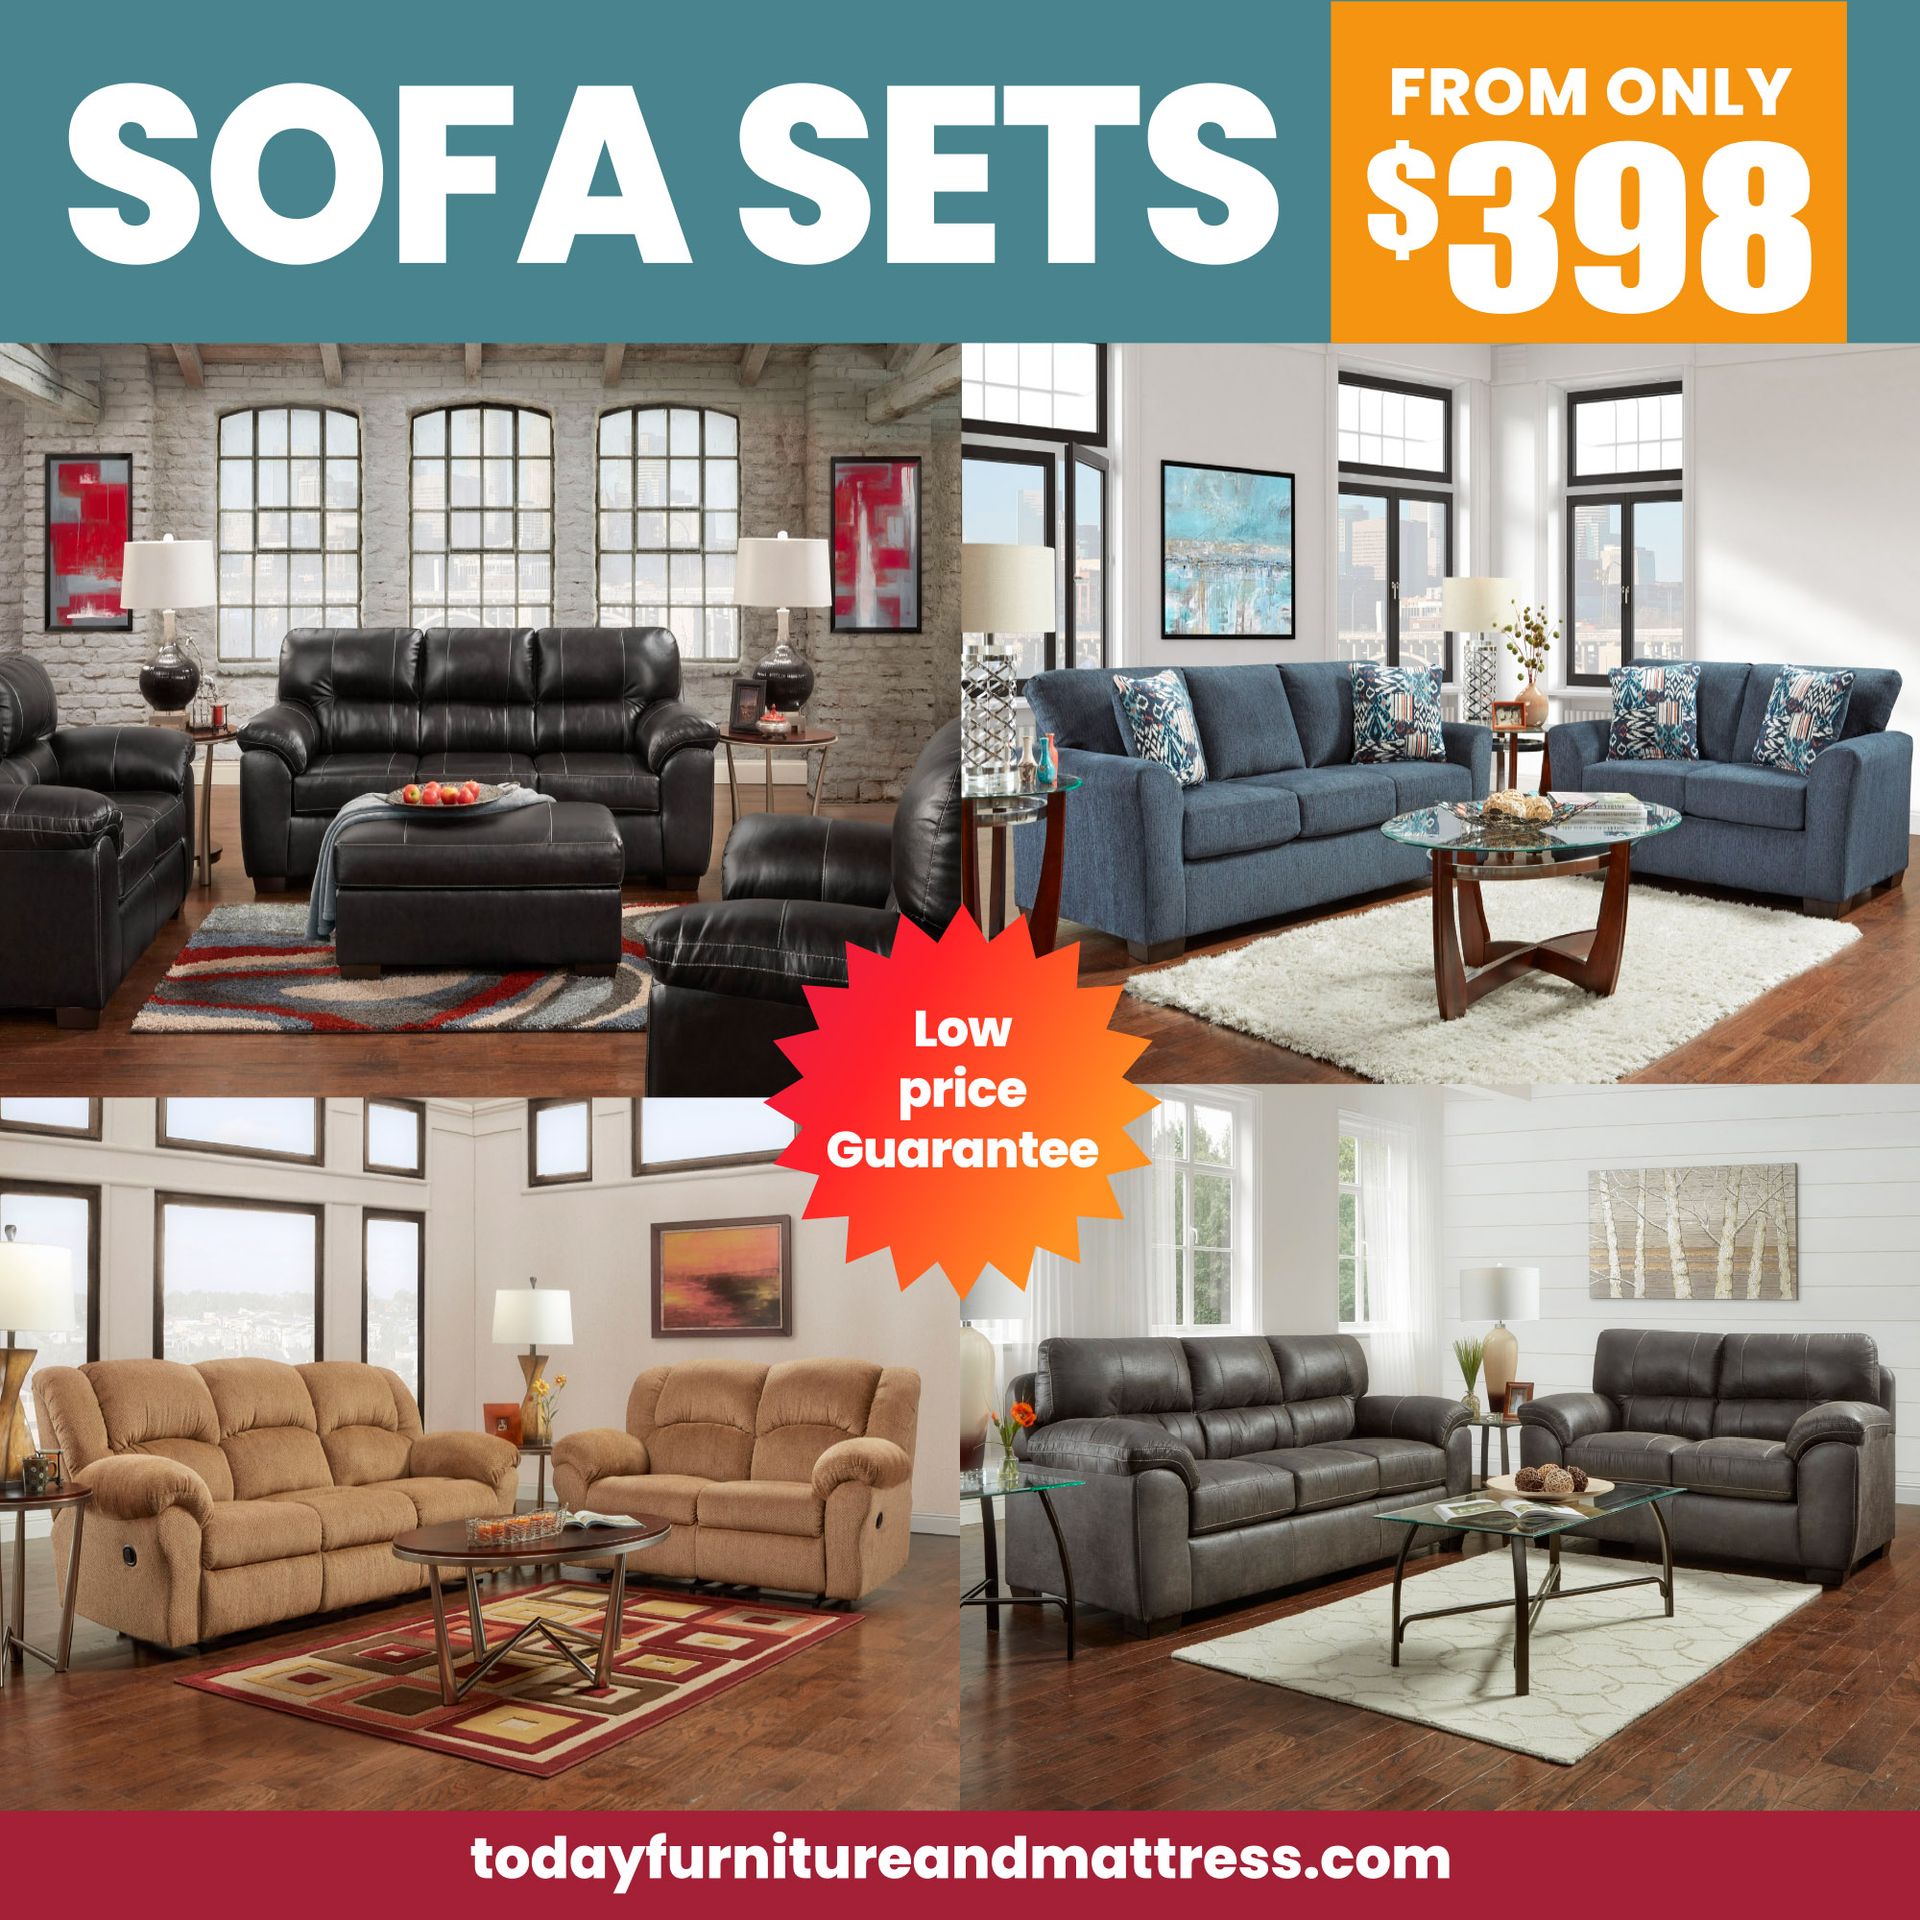 Sofa Sets From Only $398